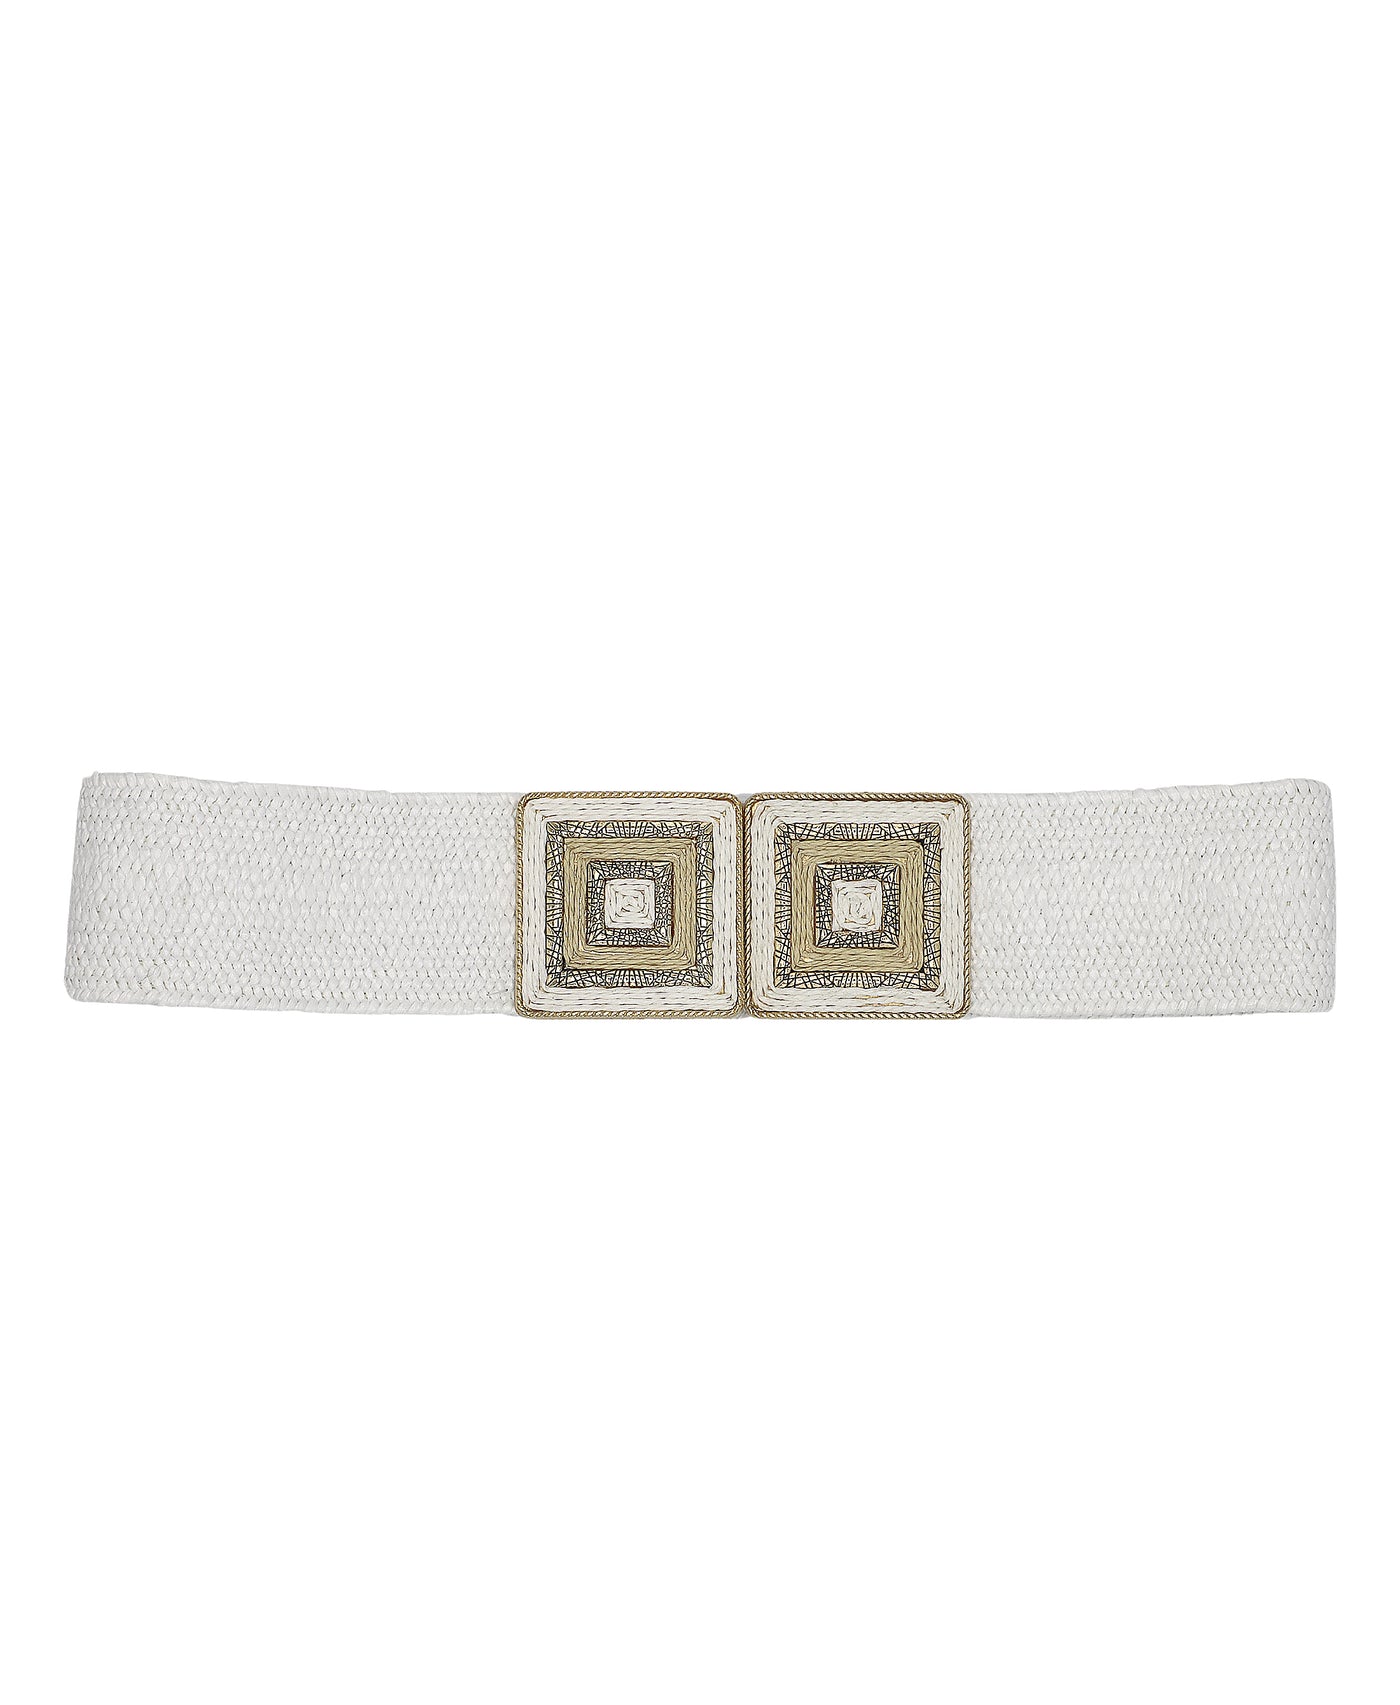 Woven Belt w/ Double Square Gold Buckle image 1